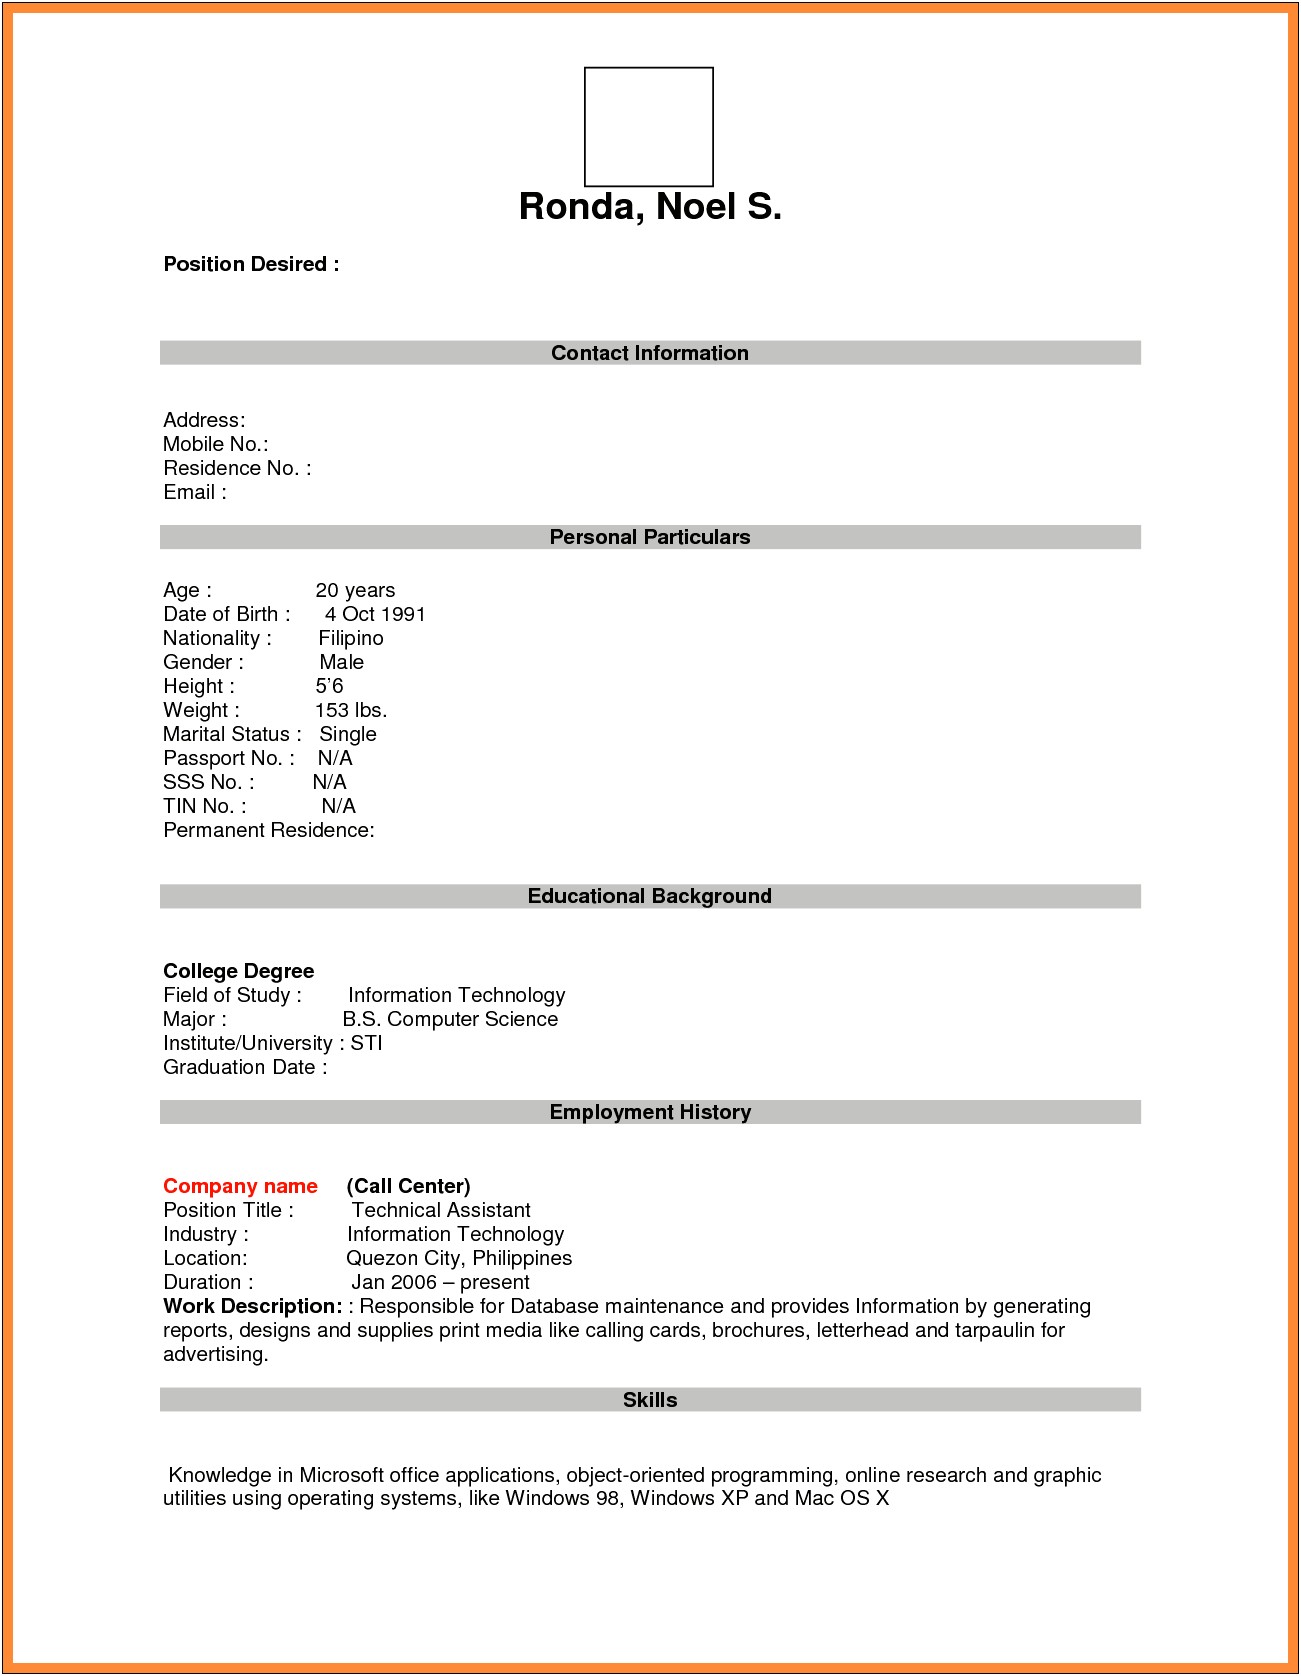 Resume Format For Job Application First Time Pdf